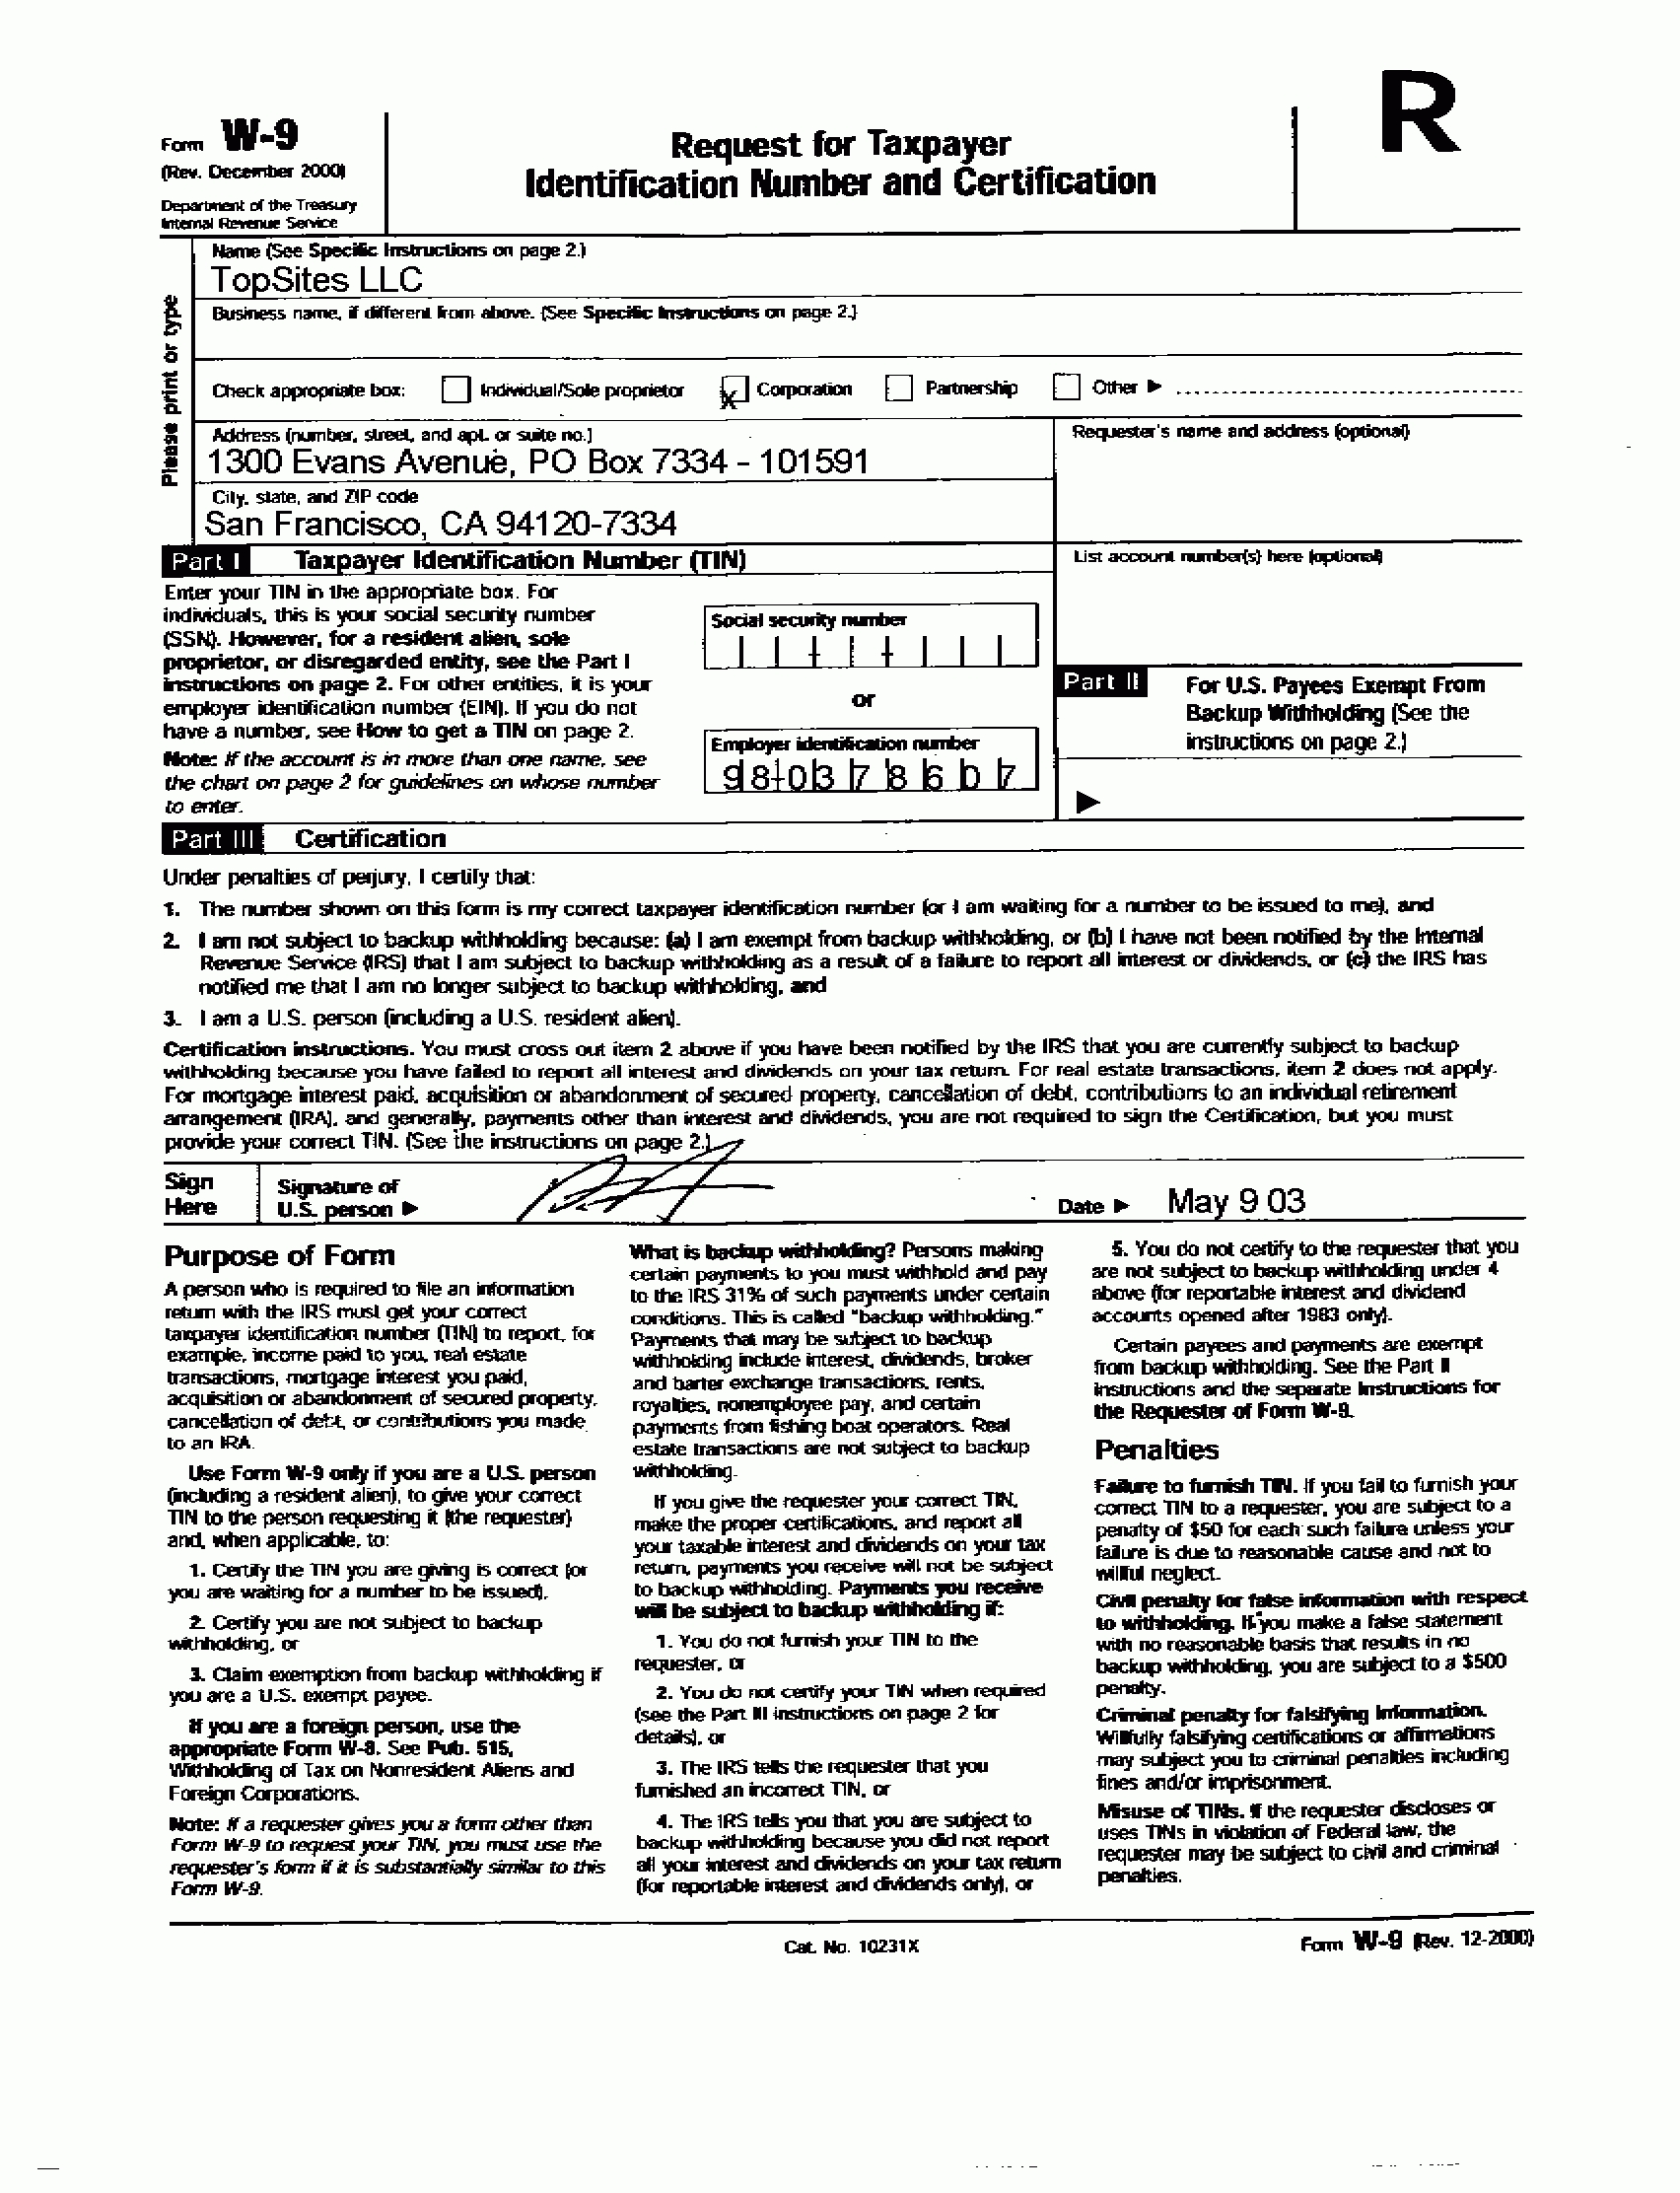 W 9 Cover Letter - Wpa.wpart.co-Blank W9 Forms 2020 Printable